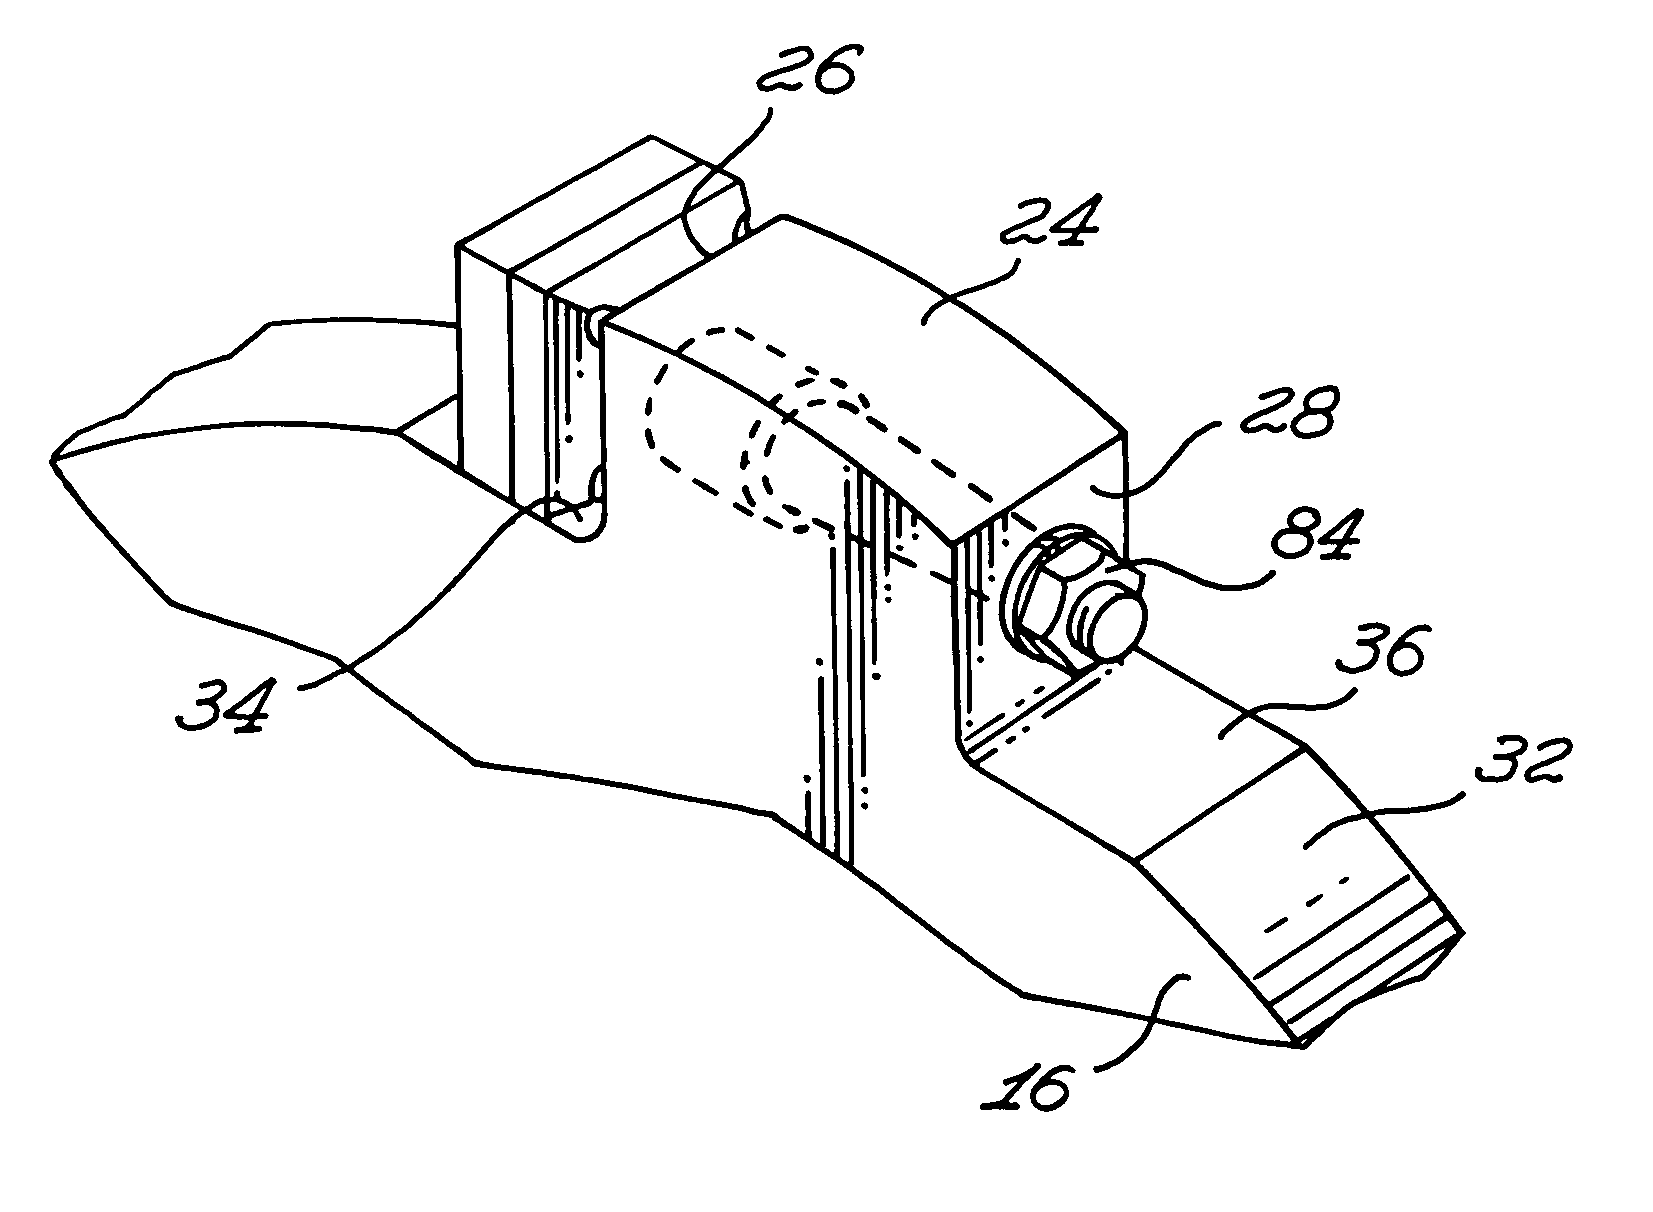 Grinder cutter tooth and anvil assembly